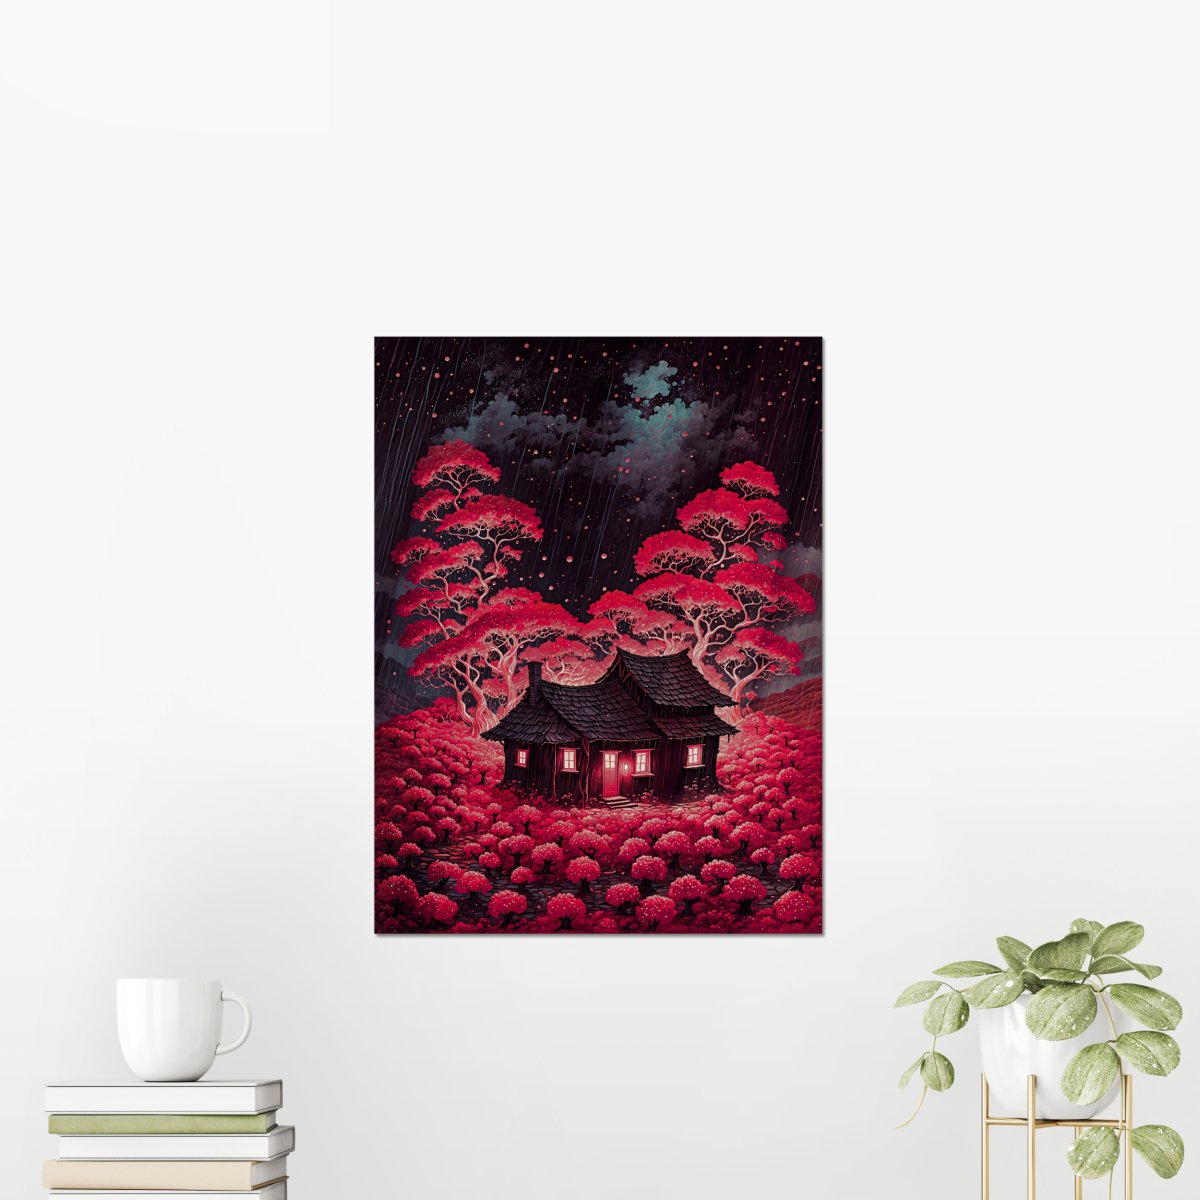 Ruby flora beauty - Art print - Poster - Ever colorful